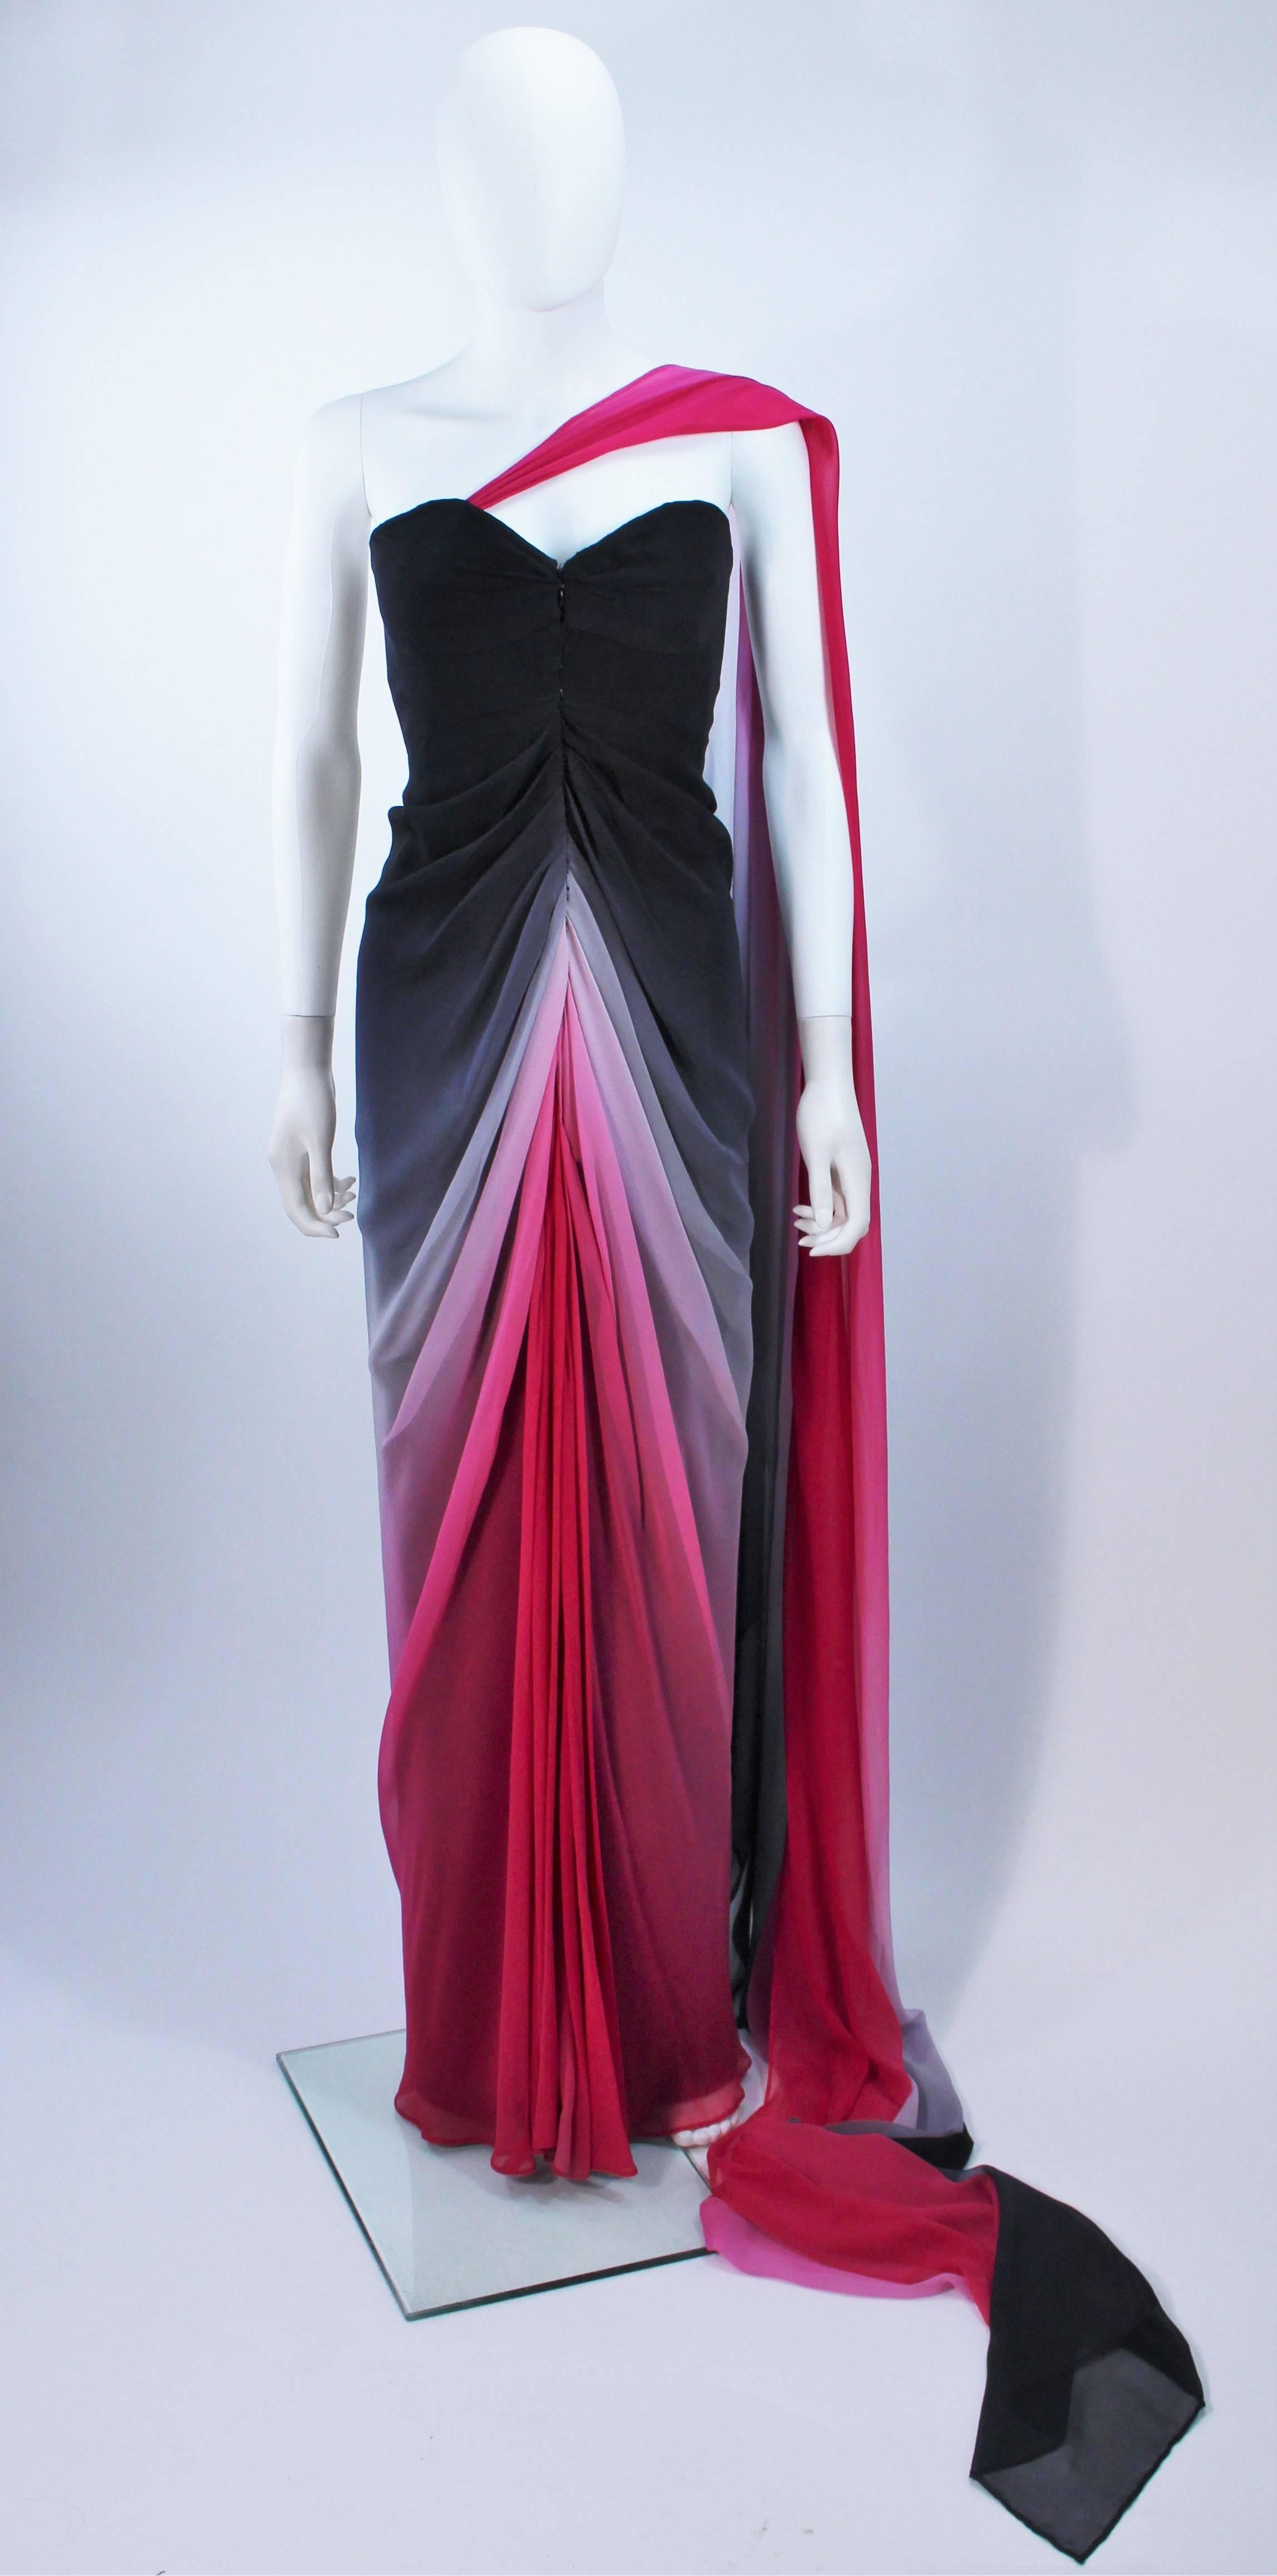 This Elizabeth Mason Couture  gown is composed of a stunning black to pink gradient silk. Features a draped style with center front closures and an interior bustier foundation. There is a removable piece, which drapes from the shoulder across the